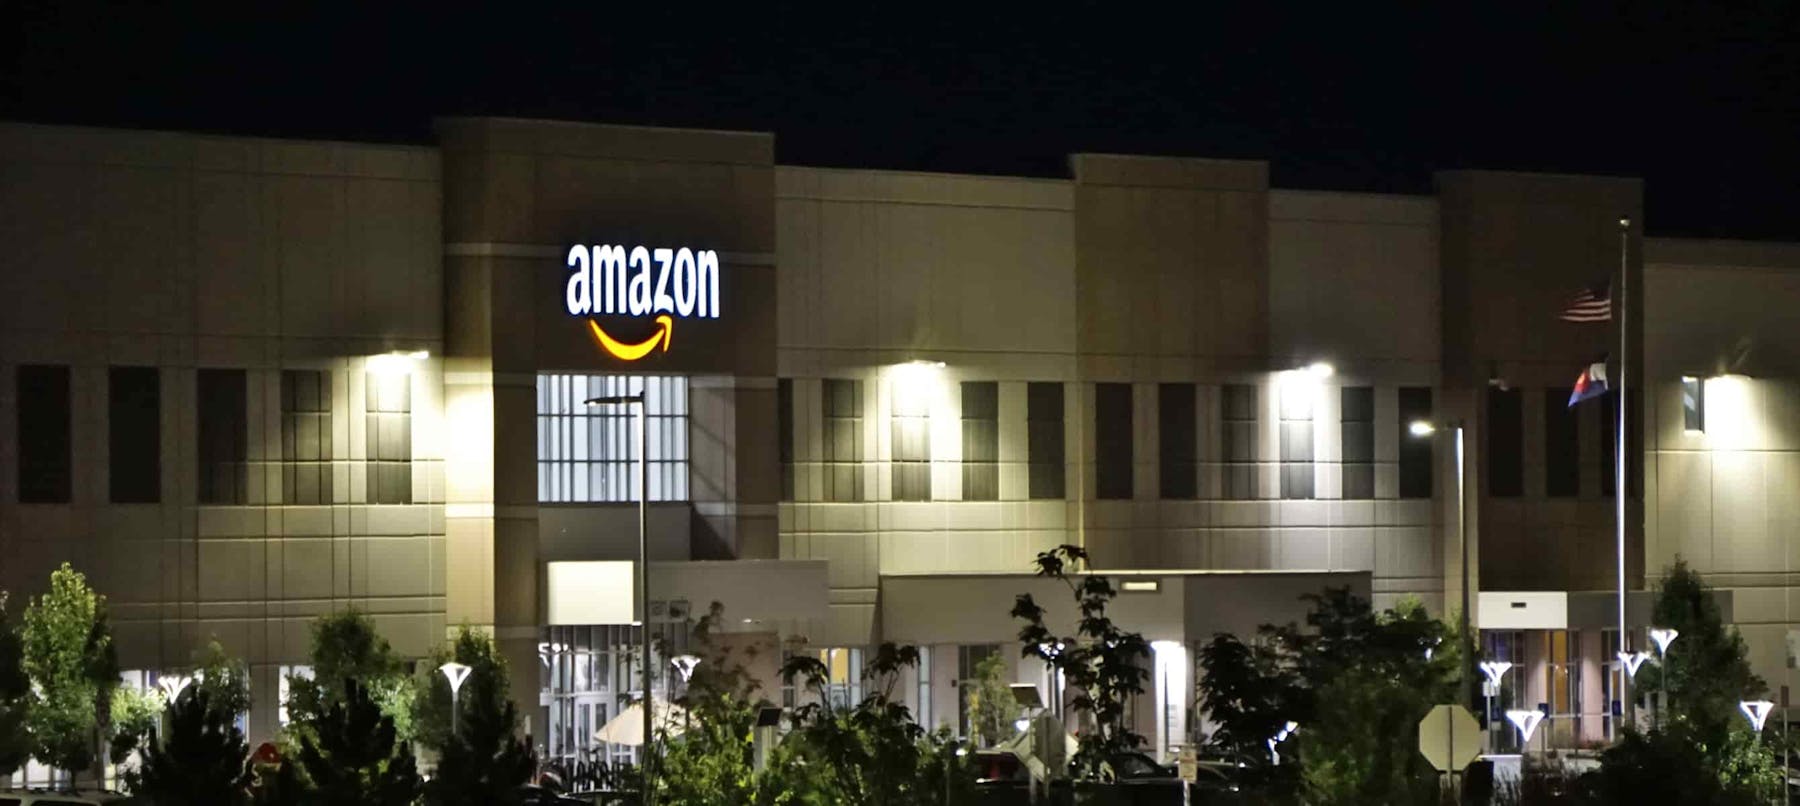 Amazon building during night time